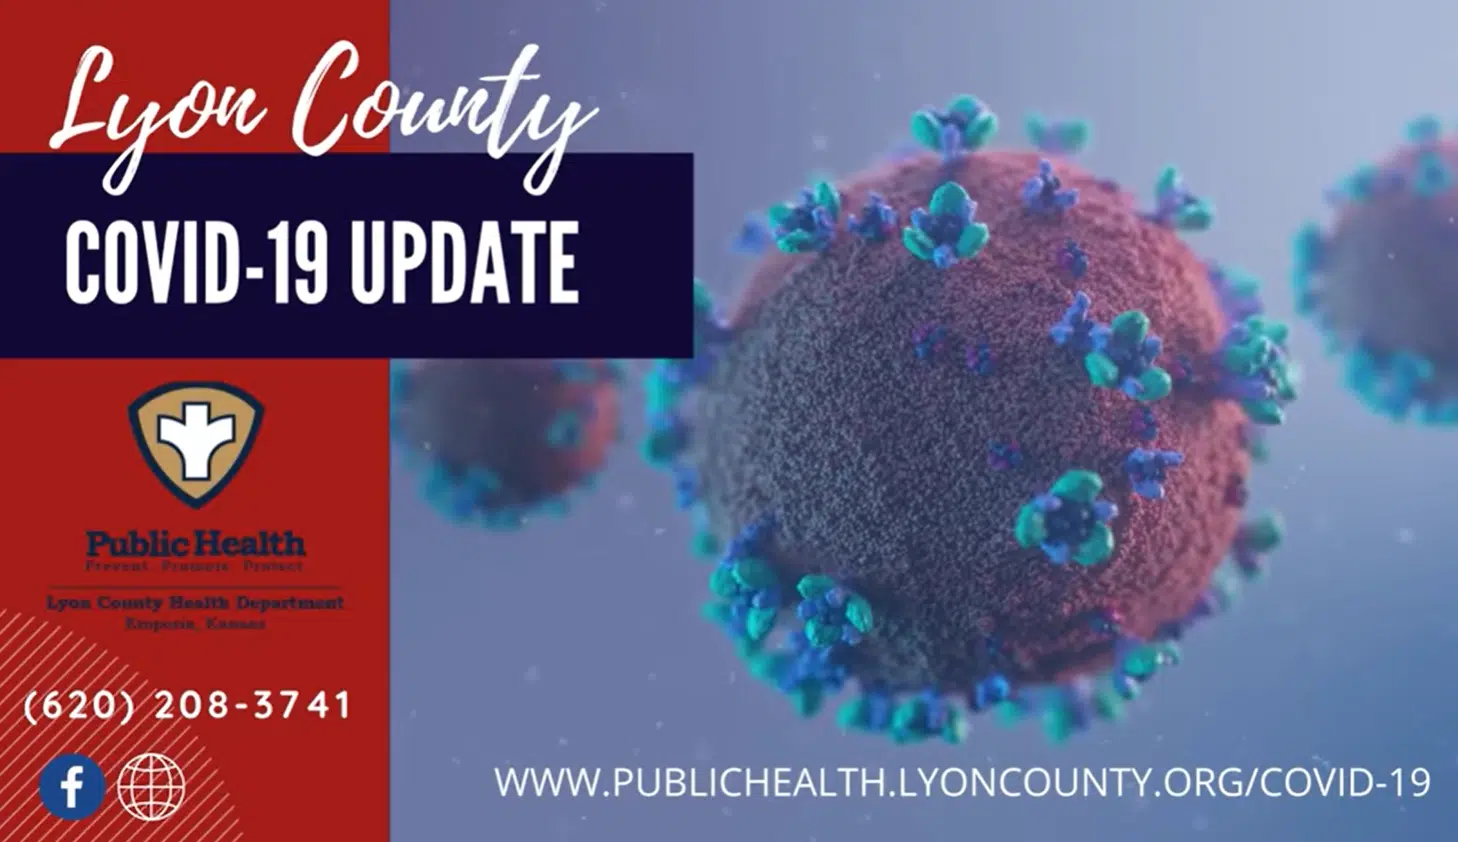 CORONAVIRUS: Two new cases reported in Lyon County Wednesday; No change in active case total